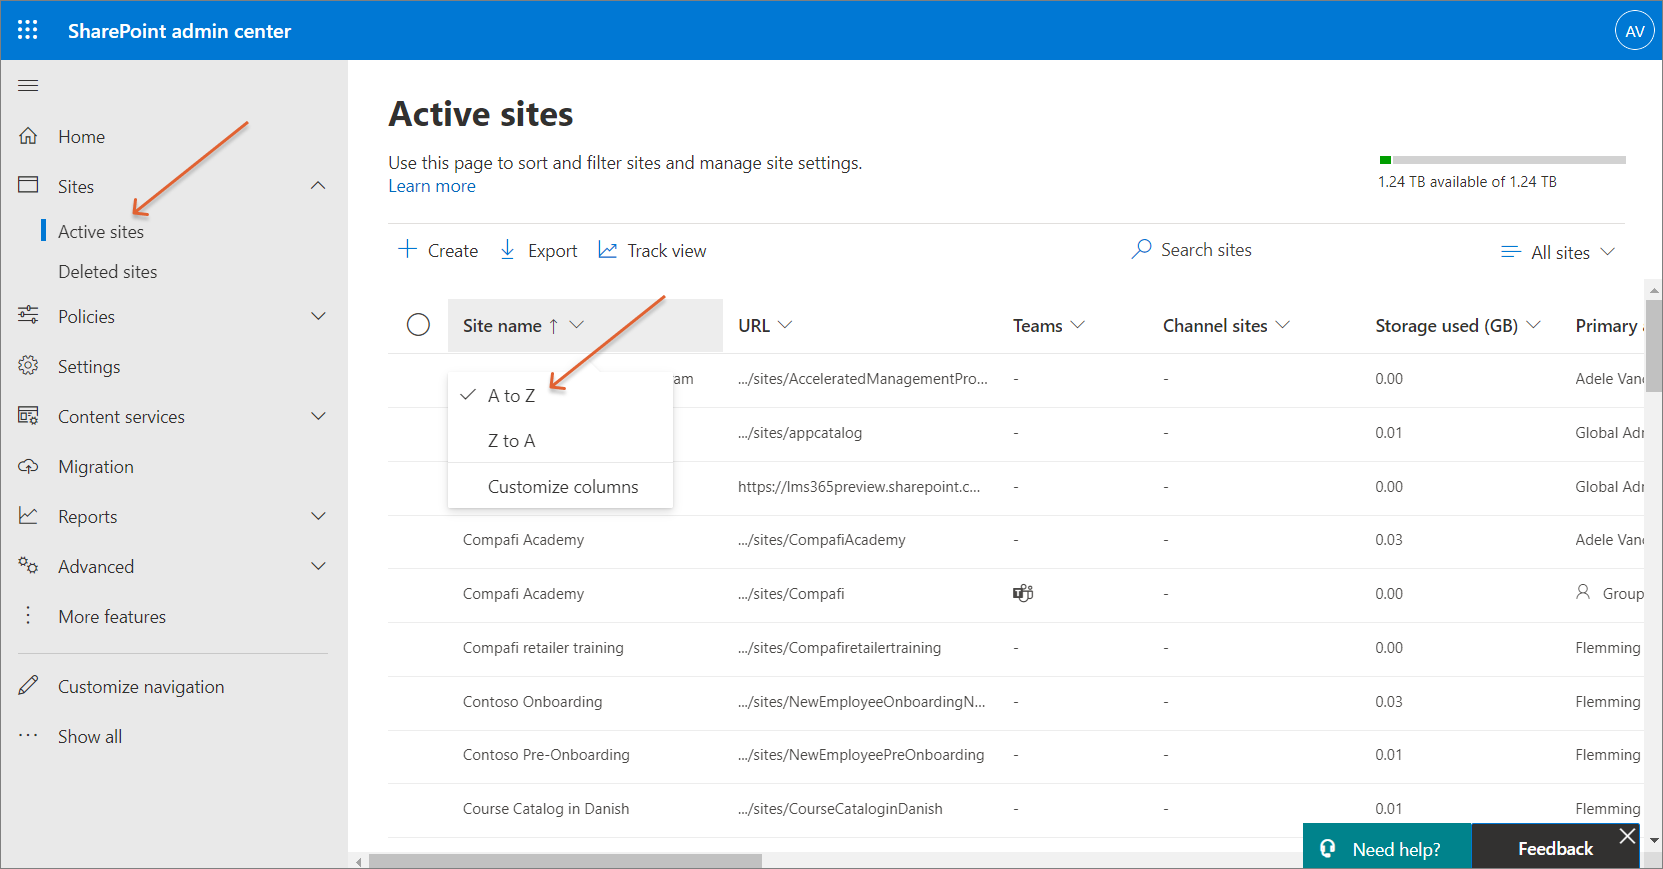 Manage permissions of the account to allow access to the SharePoint root site